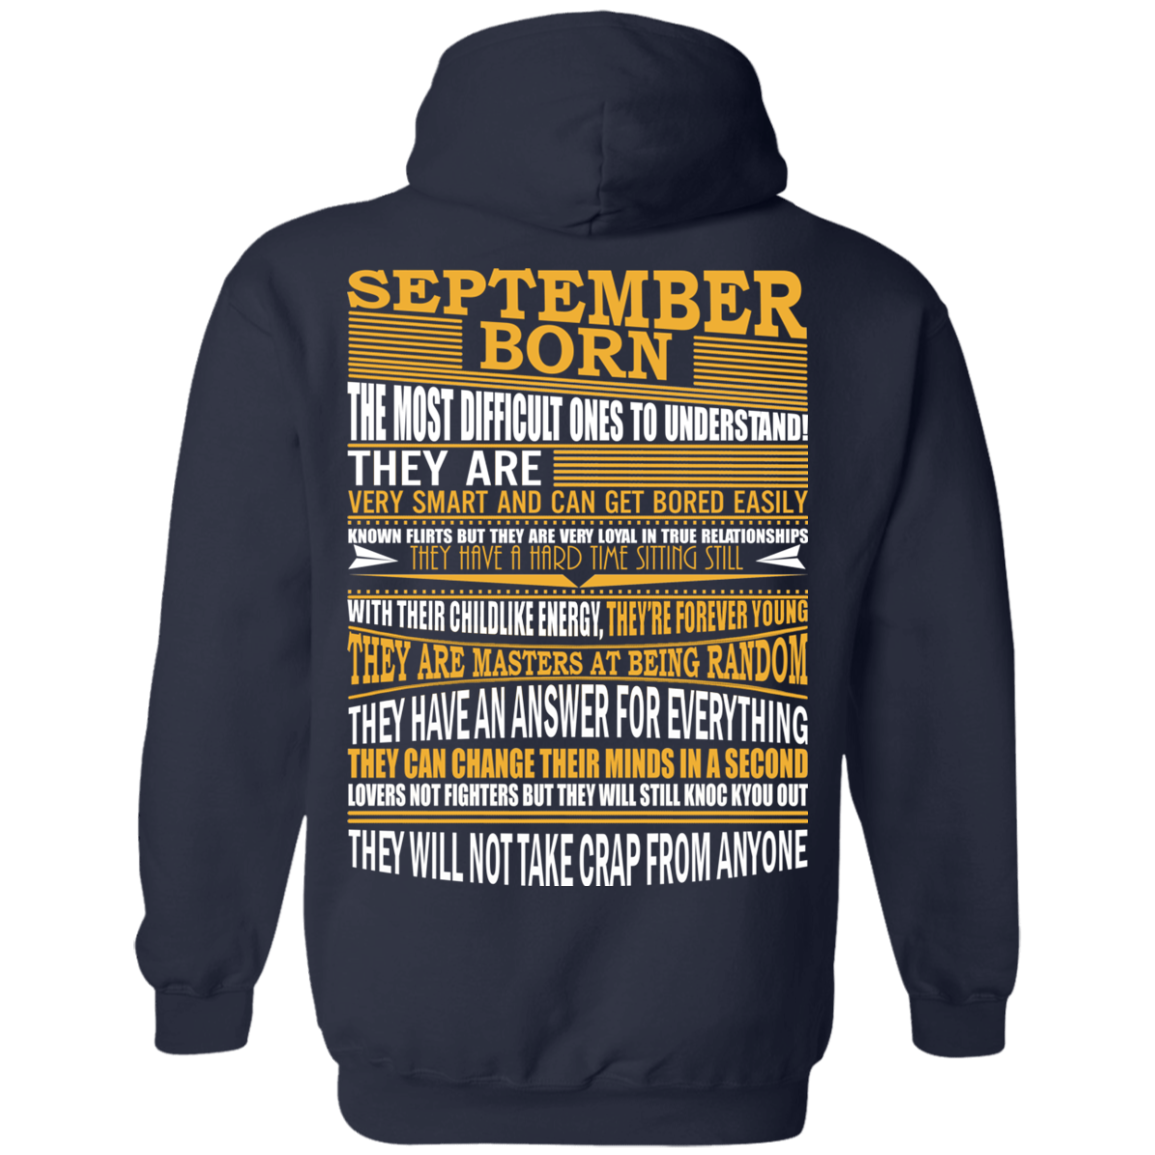 September Born - The Most Difficult Ones To Understand Shirt